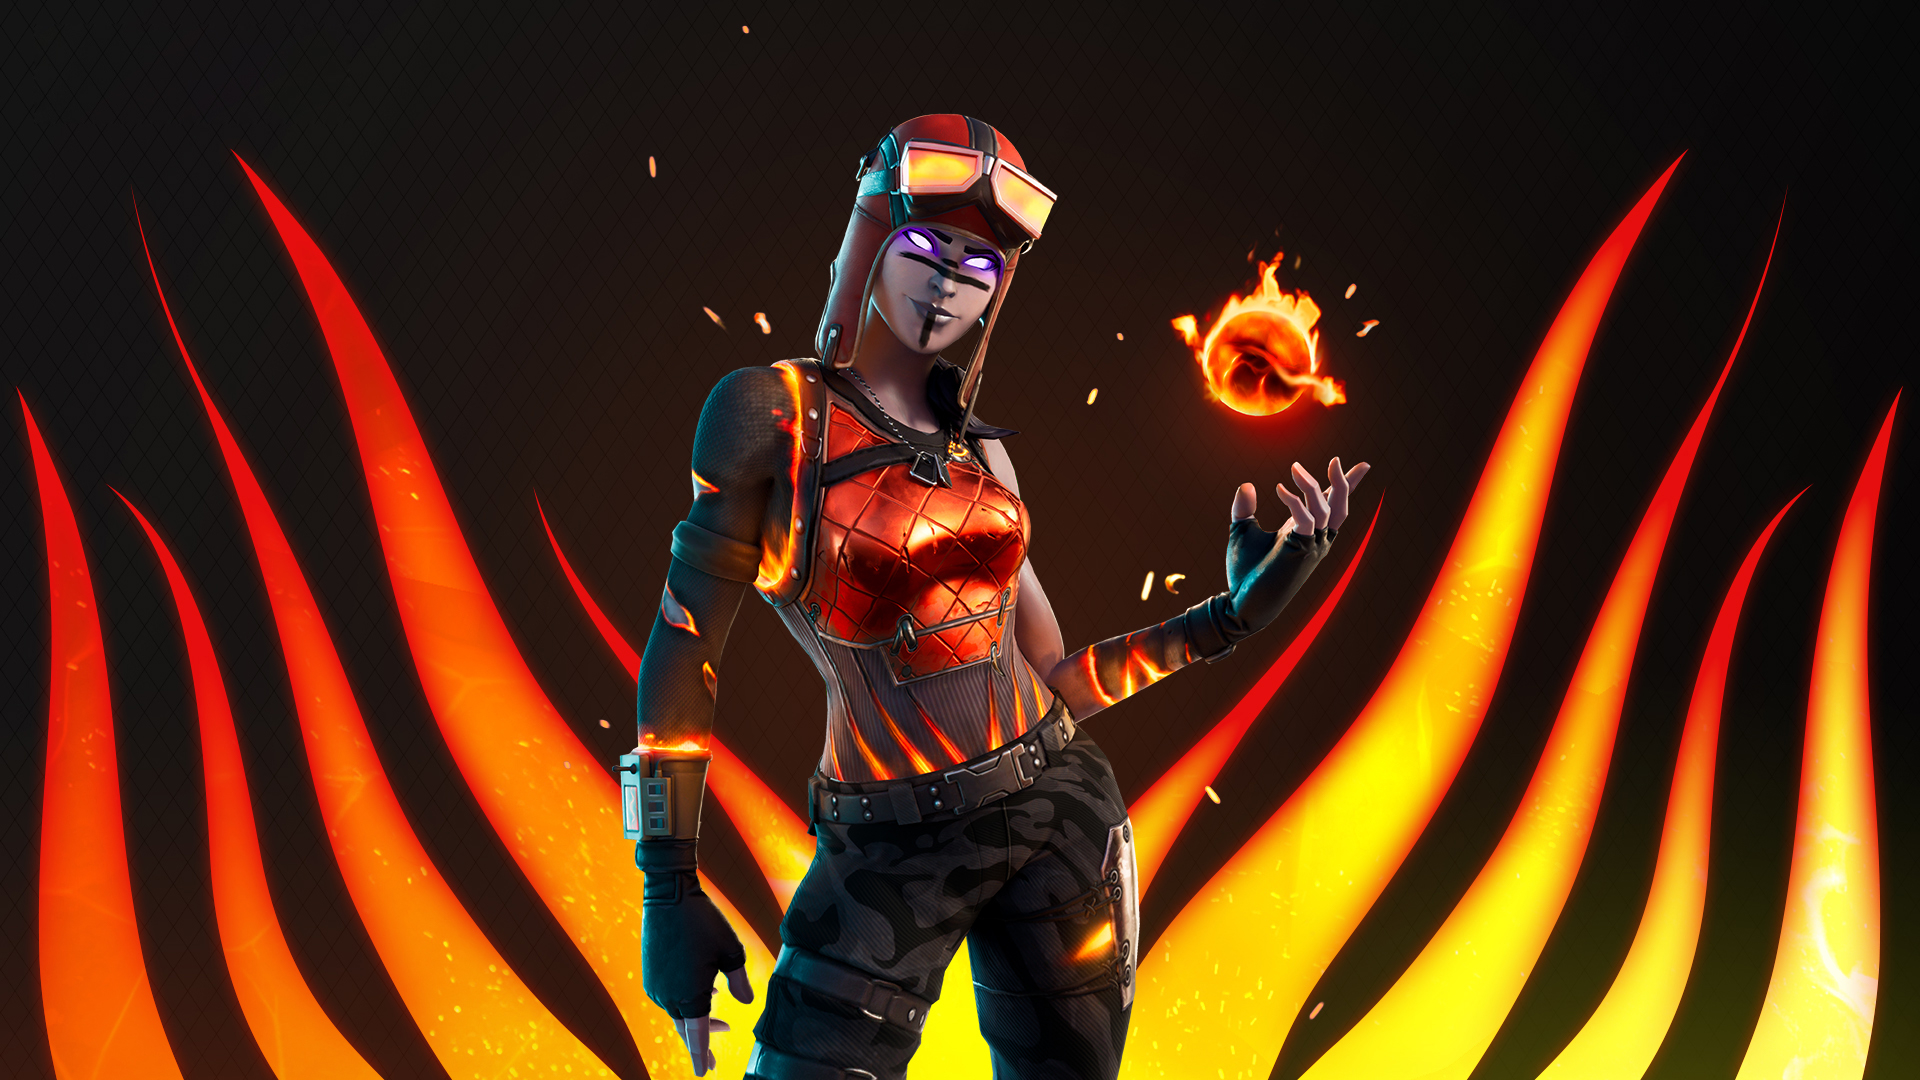 Blaze Fortnite Wallpaper Hd Games 4k Wallpapers Images Photos And Background